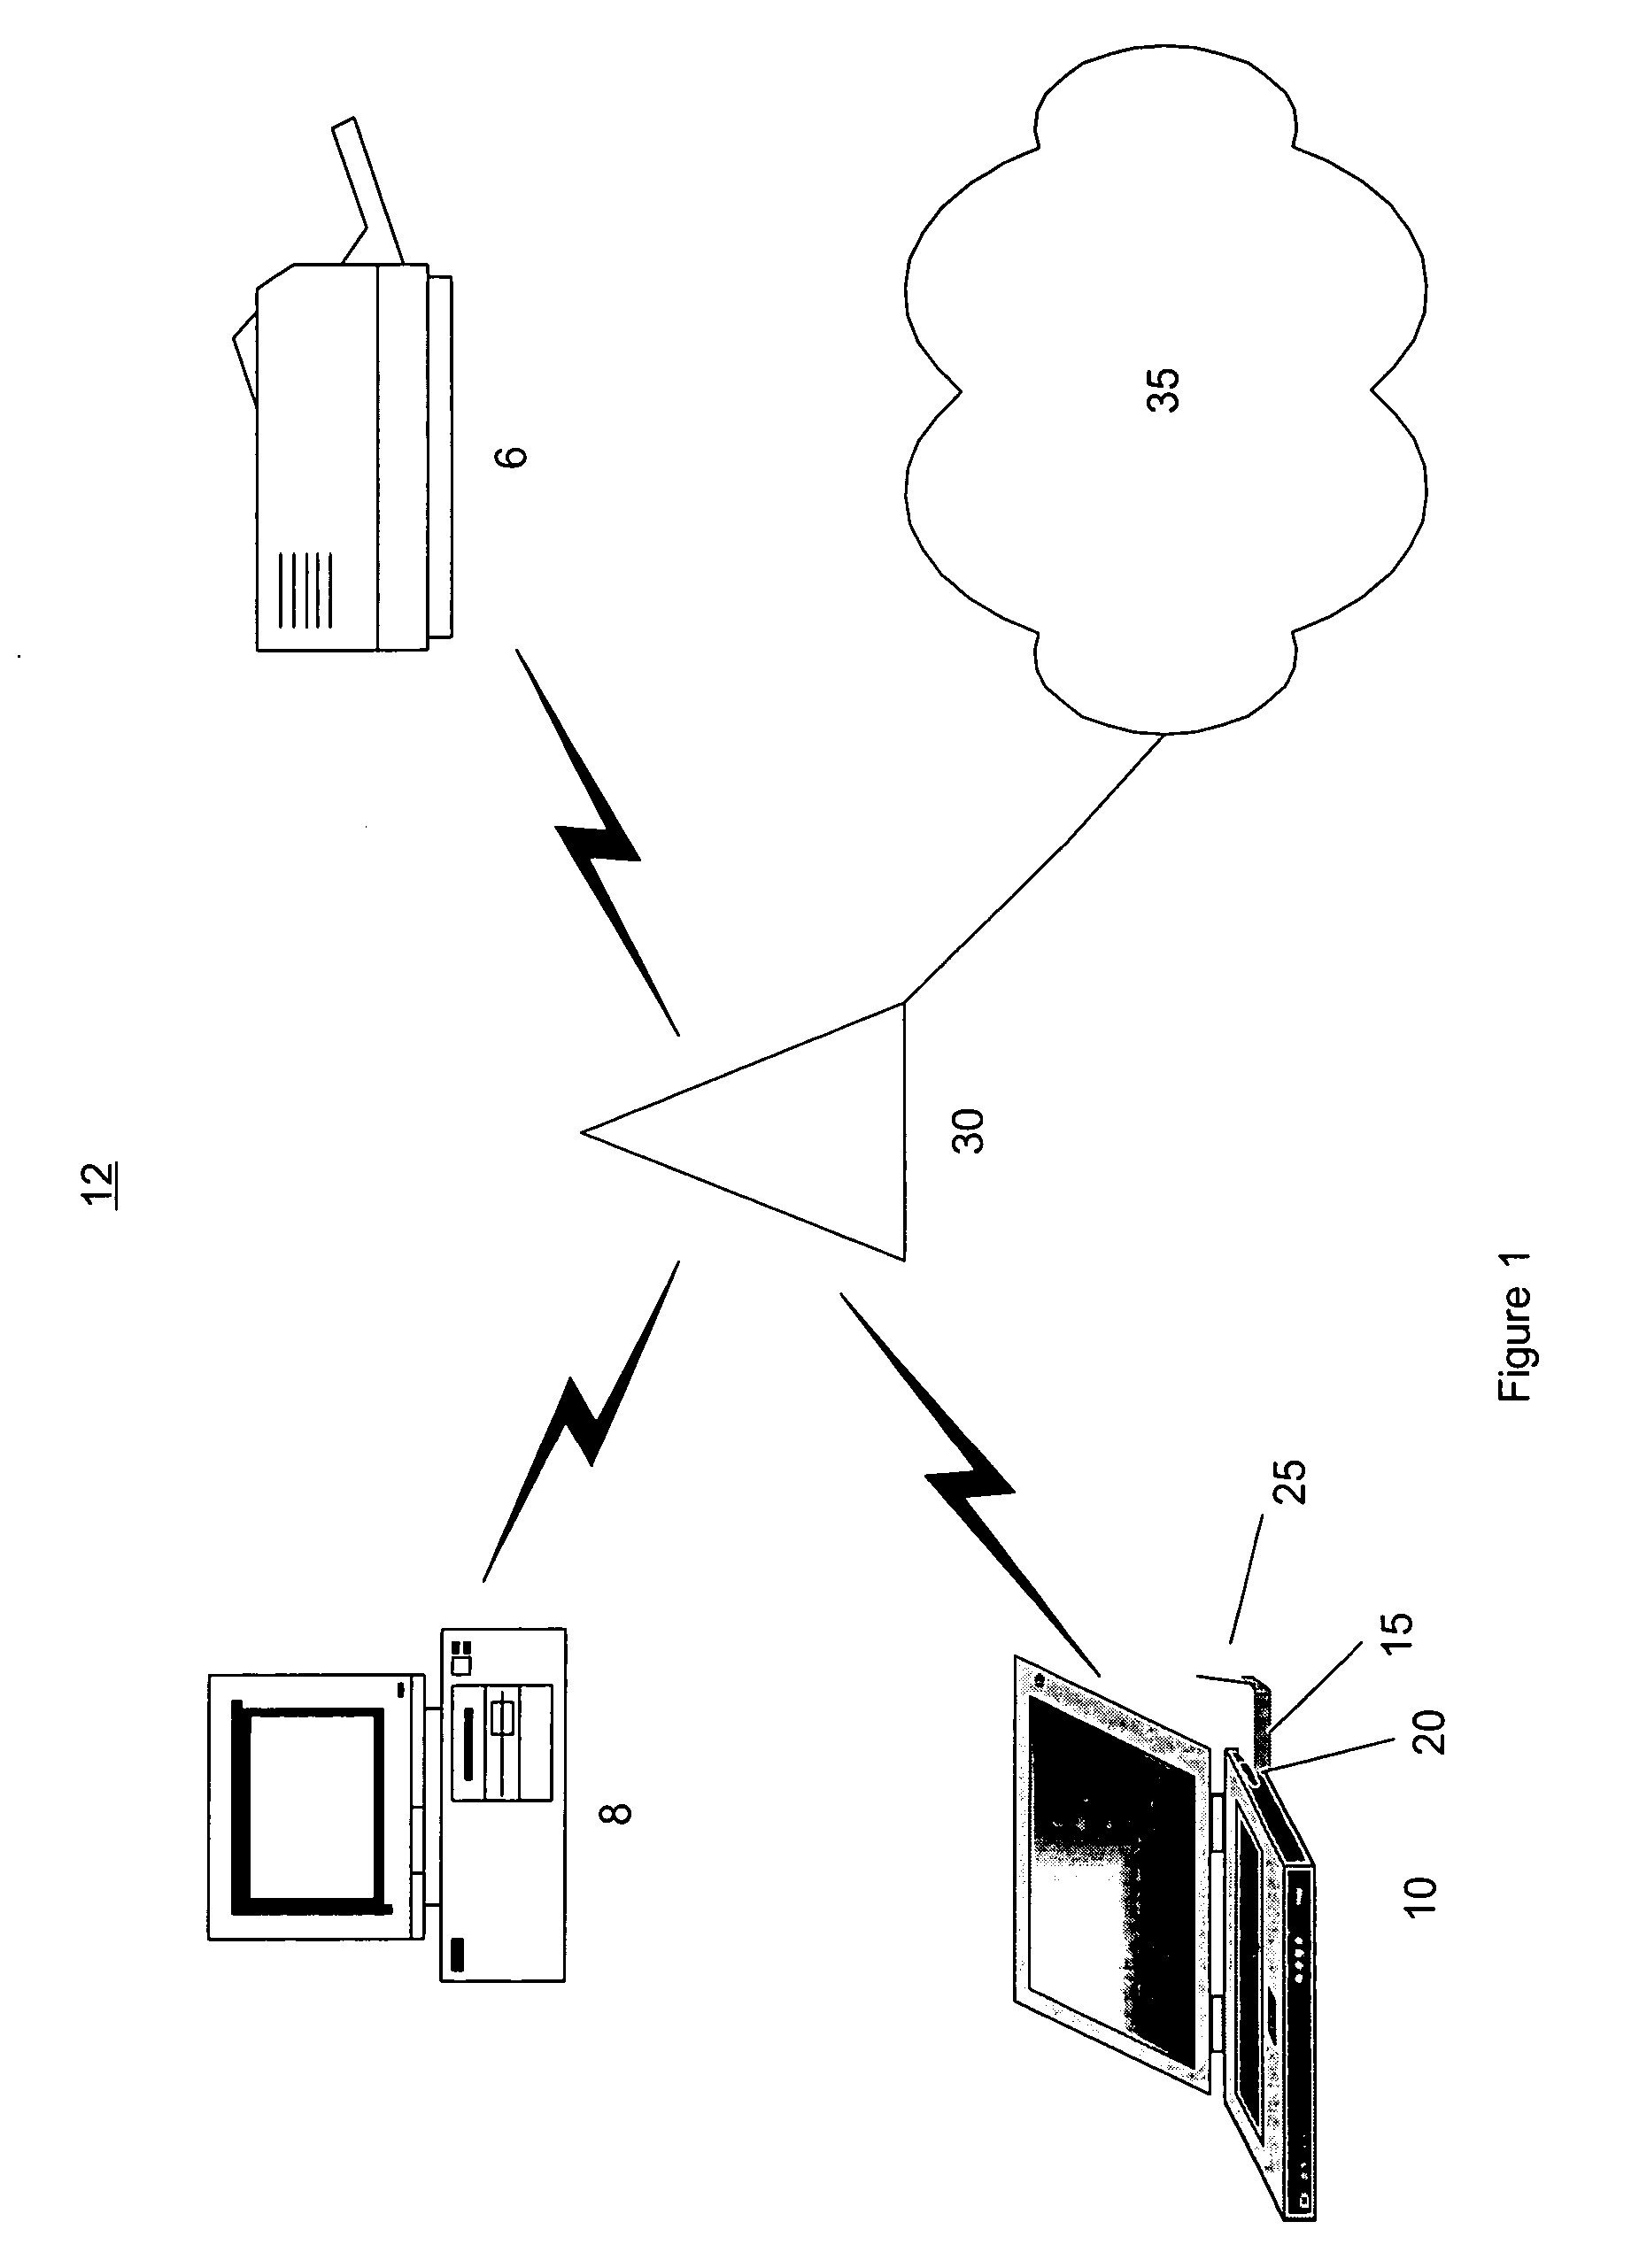 System and method for wireless network security